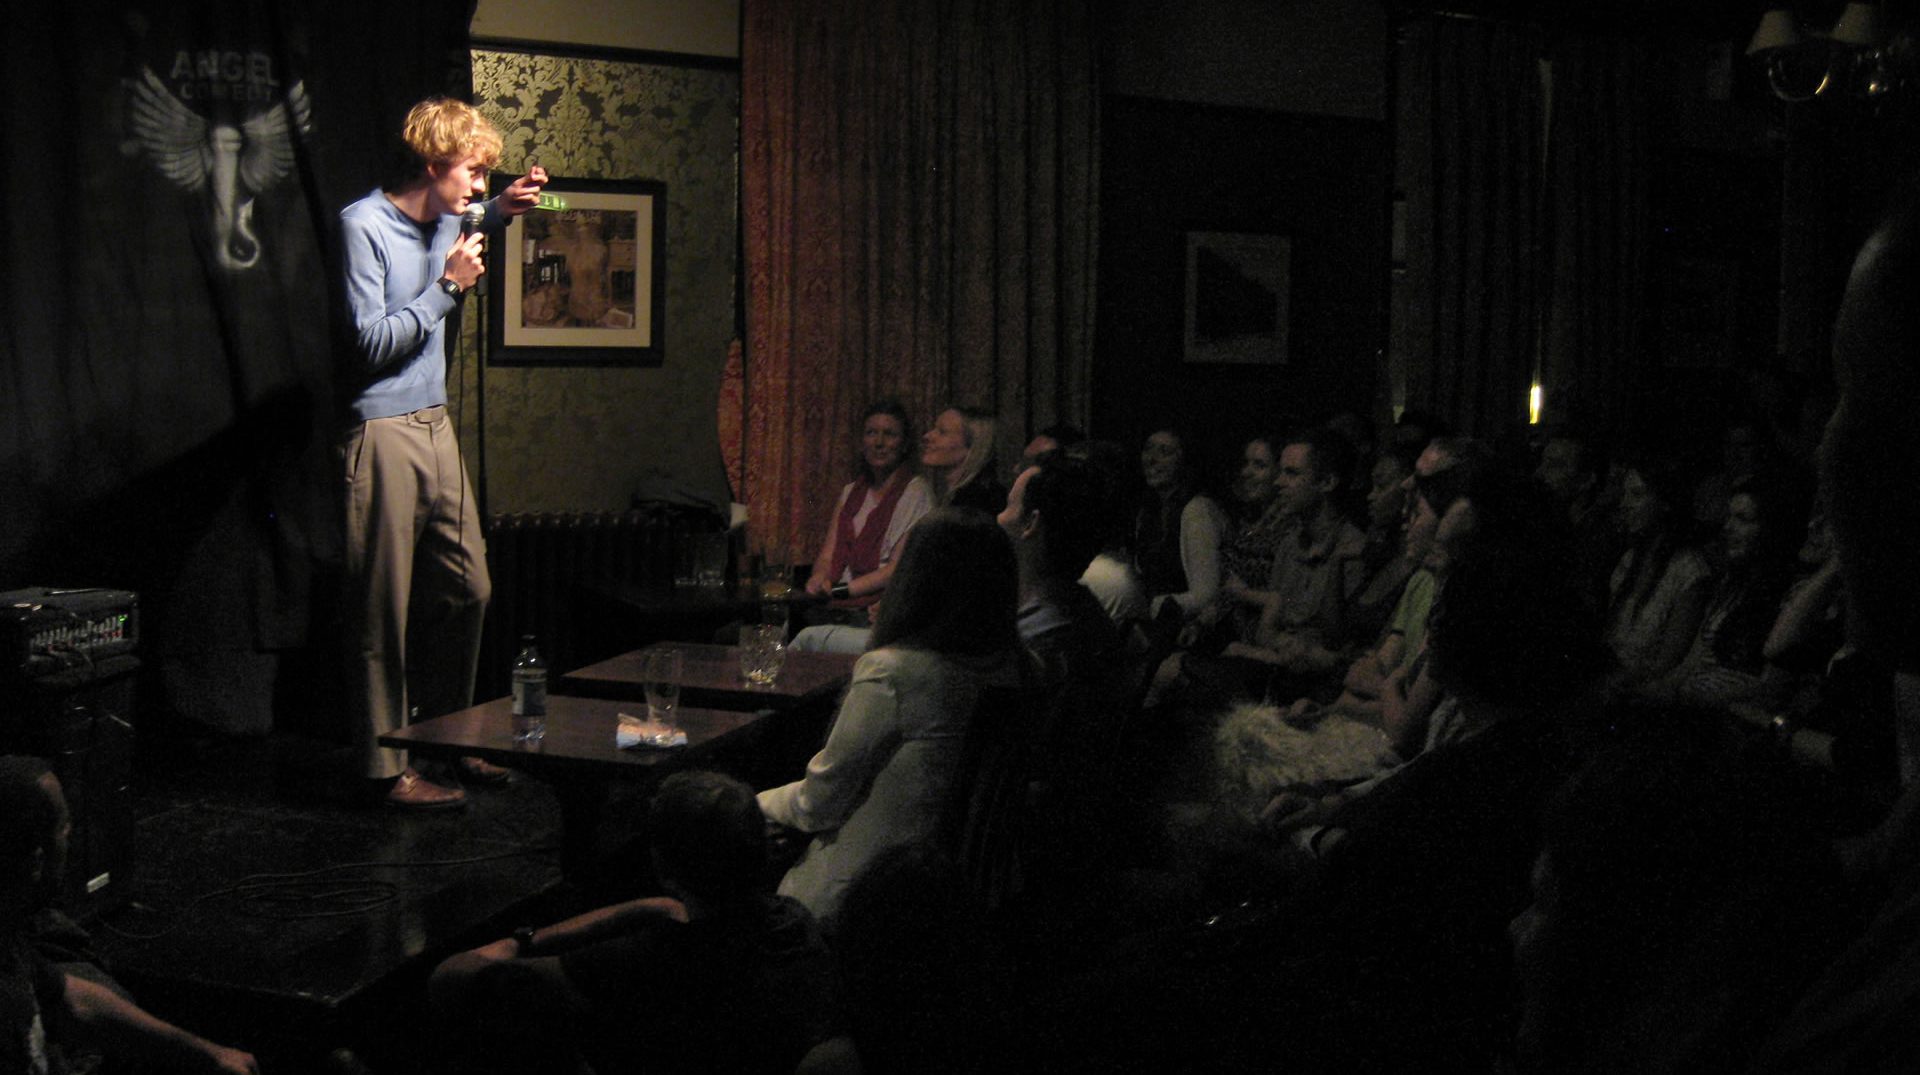 Angel Comedy at The Camden Head